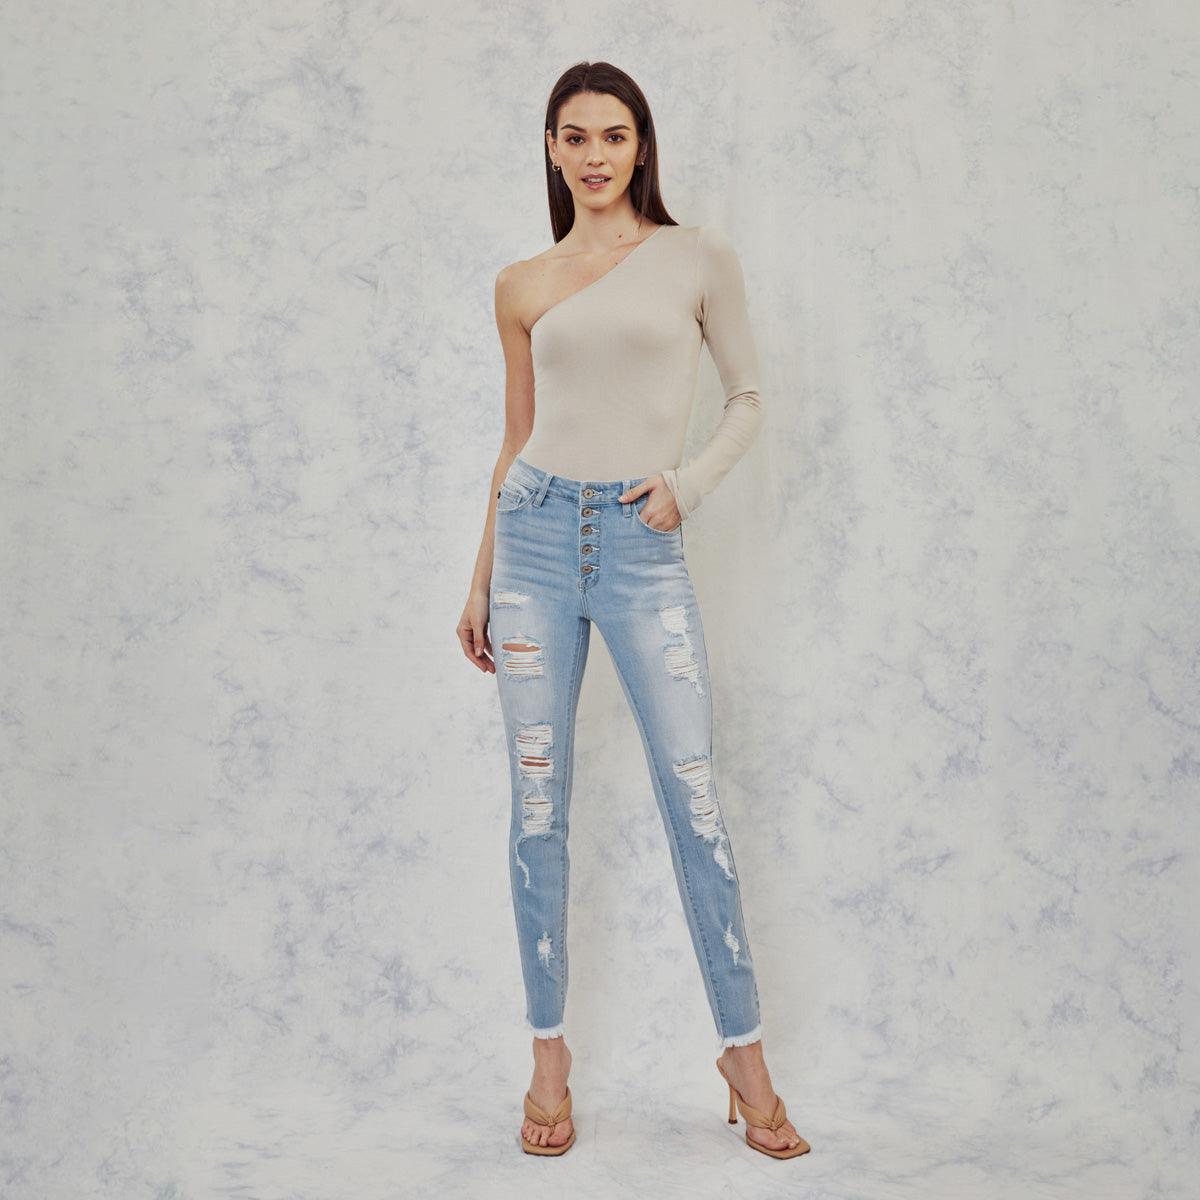 These skinny skinnies are crafted from stretchably snuggly denim, distressed with love, and rockin' a raw hem for a totally "lived-in" vibe. Our Lola High Rise Super Skinny Jeans have a high-waist fit that hugs the body all the way down to the ankle. These jeans feature a classic 5-pocket design, one-button front, and zippy closure. And they come in light, medium, and dark washes.